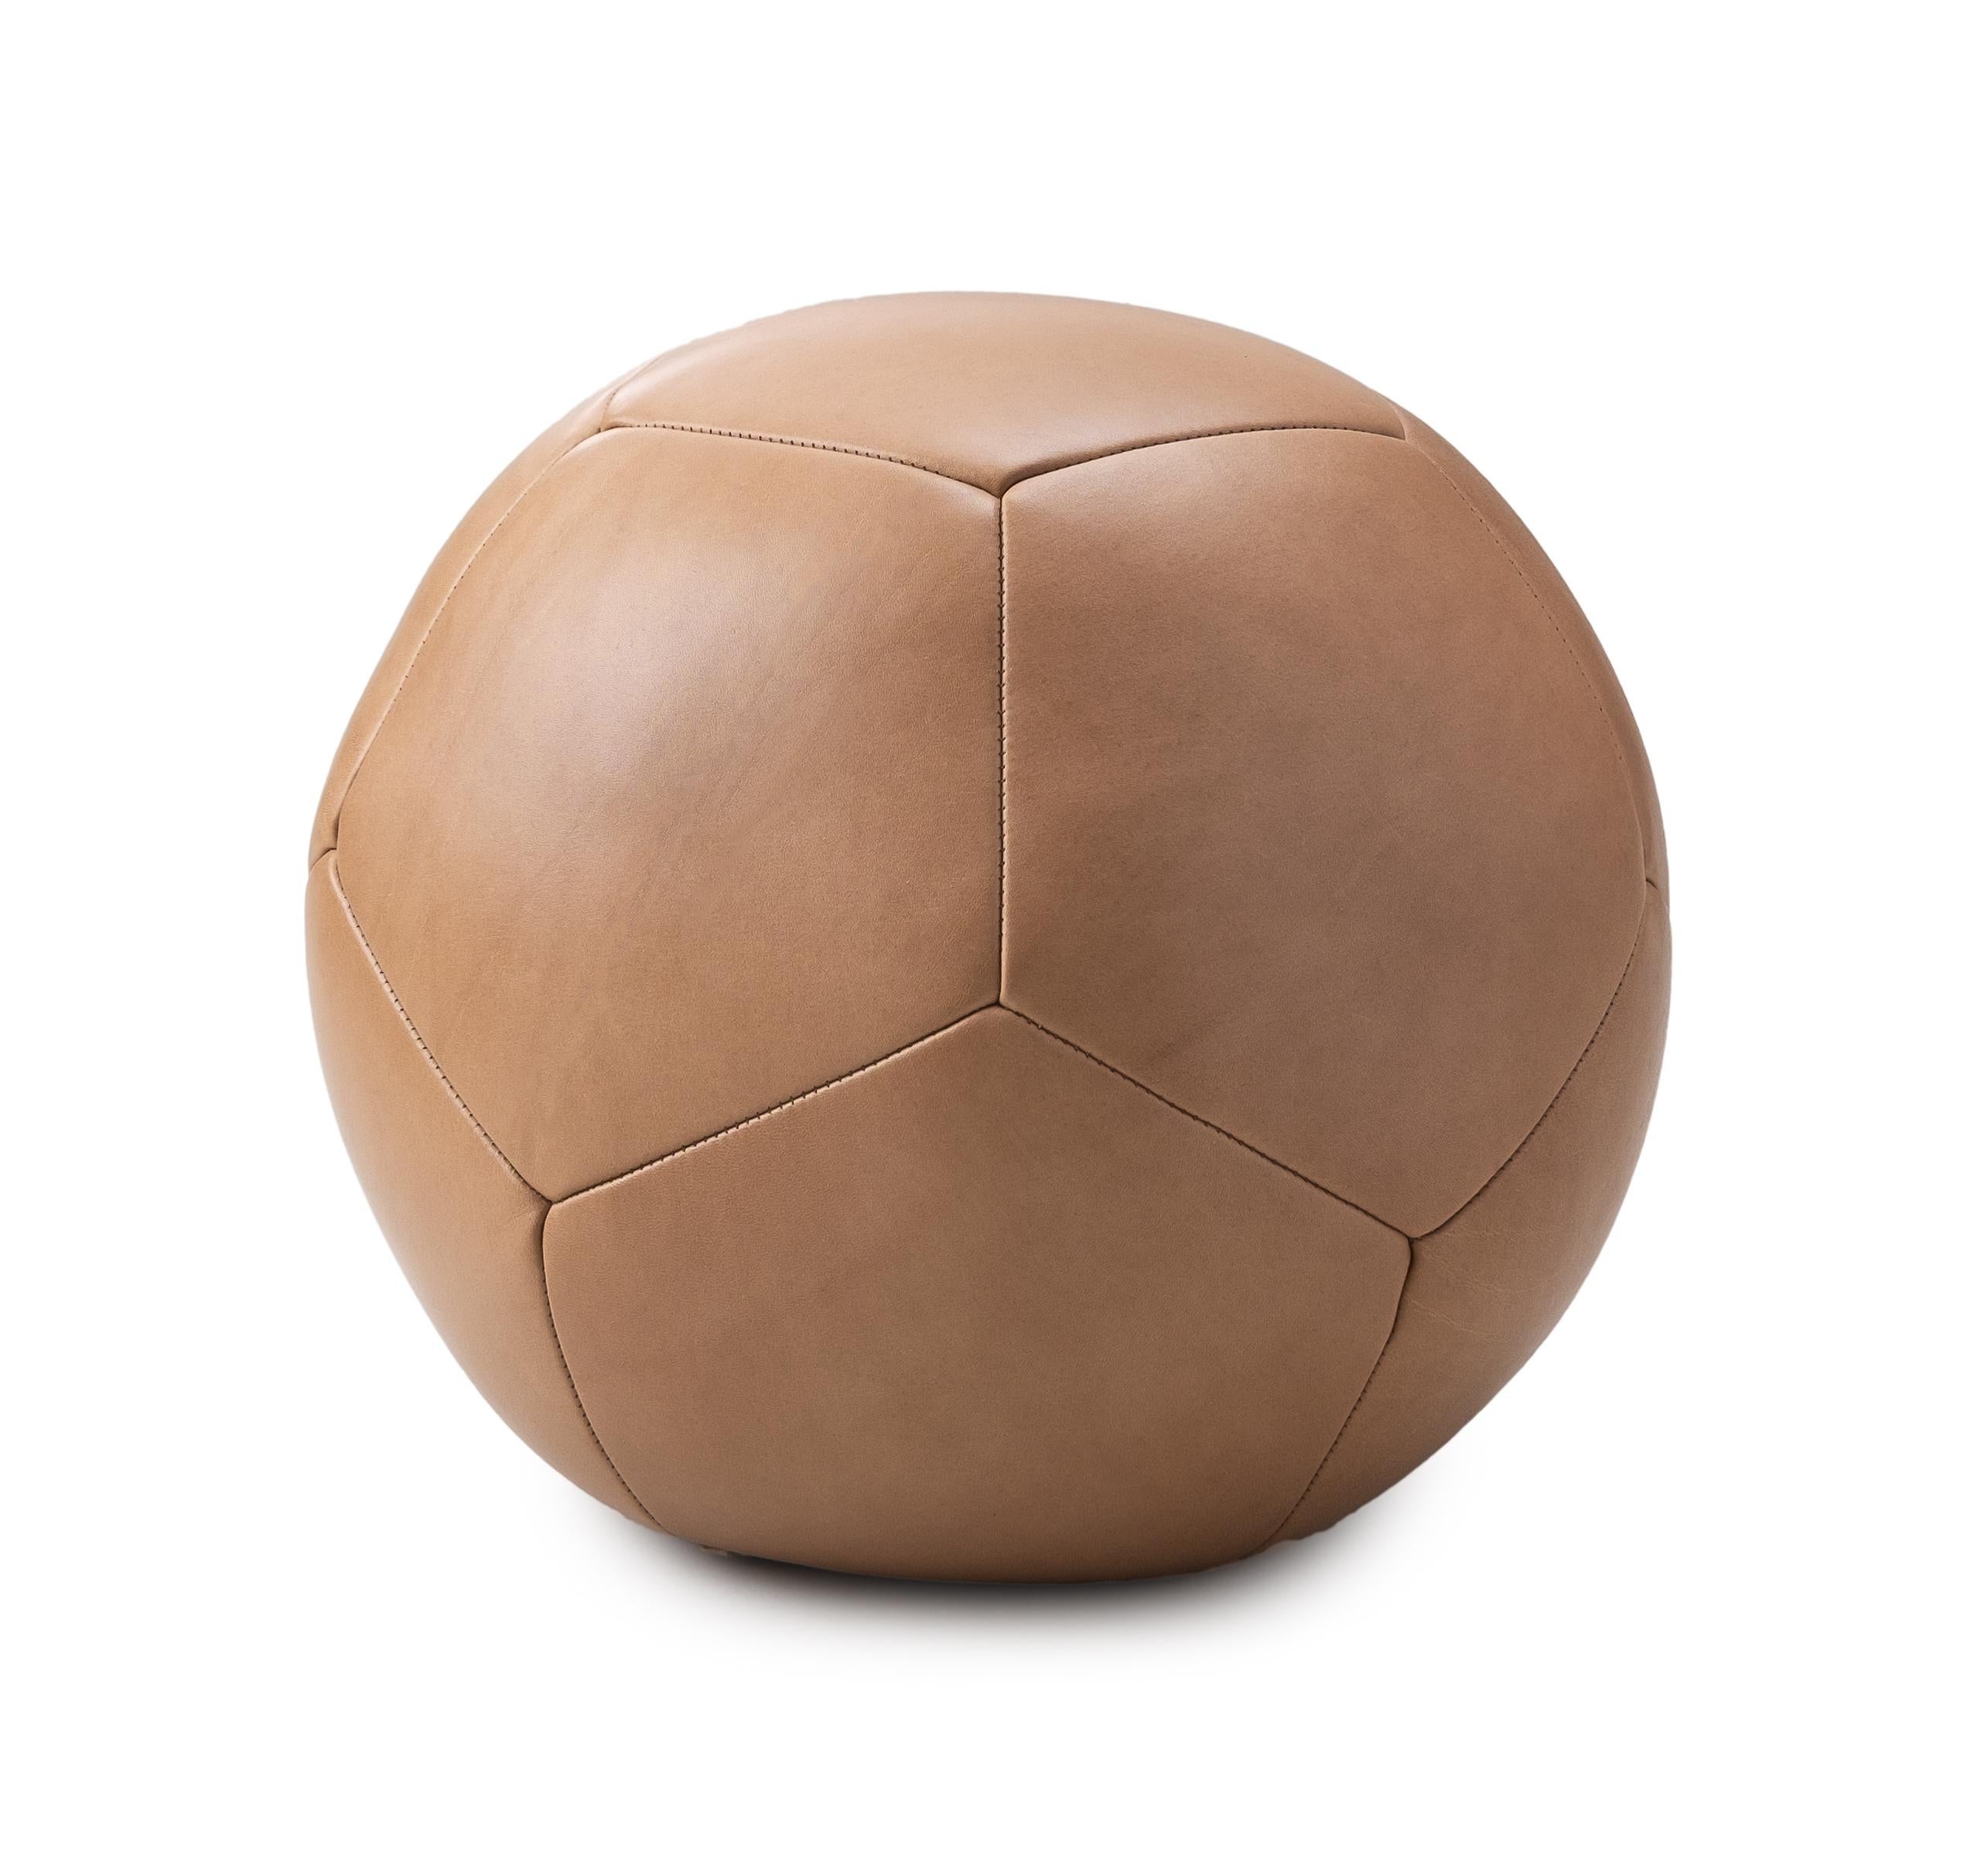 Round, sculptural and uniquely abstract, crafted with supple European leather, the Ball Ottoman has the cleanest Silhouette of our ottoman collection.
Our ottomans are hand-filled with compressed foam and finished with an elongated hand-laced